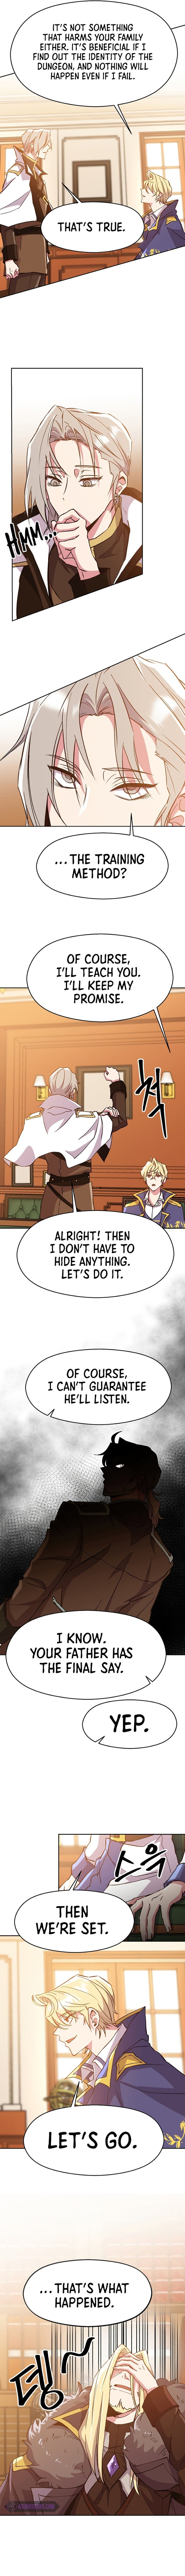 Archmage Transcending Through Regression - Chapter 17 Page 4